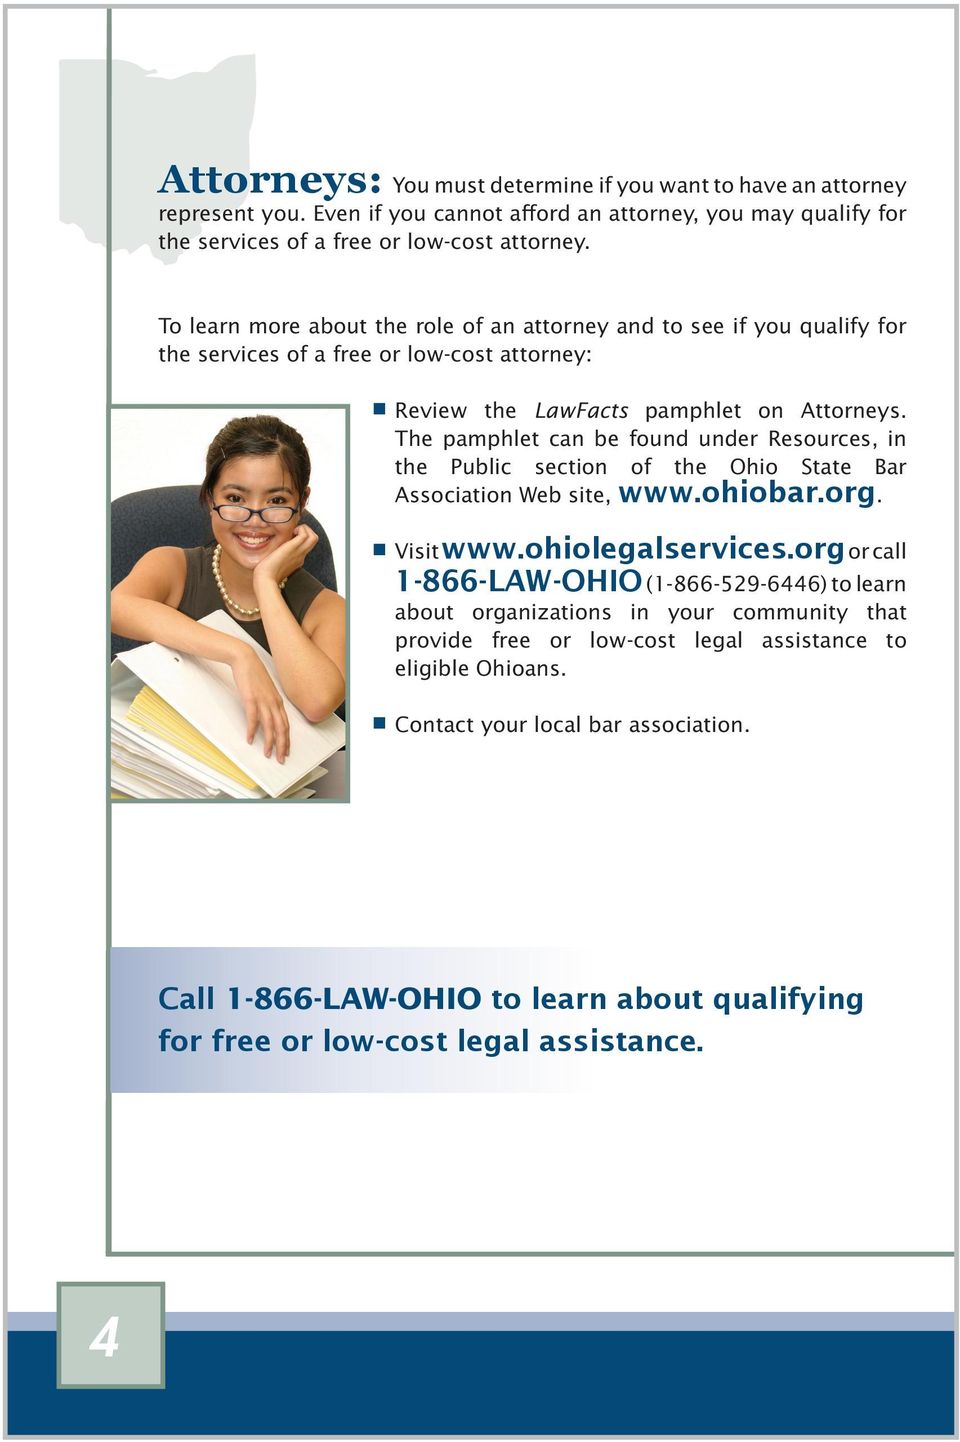 The pamphlet can be found under Resources, in the Public section of the Ohio State Bar Association Web site, www.ohiobar.org. Visit www.ohiolegalservices.